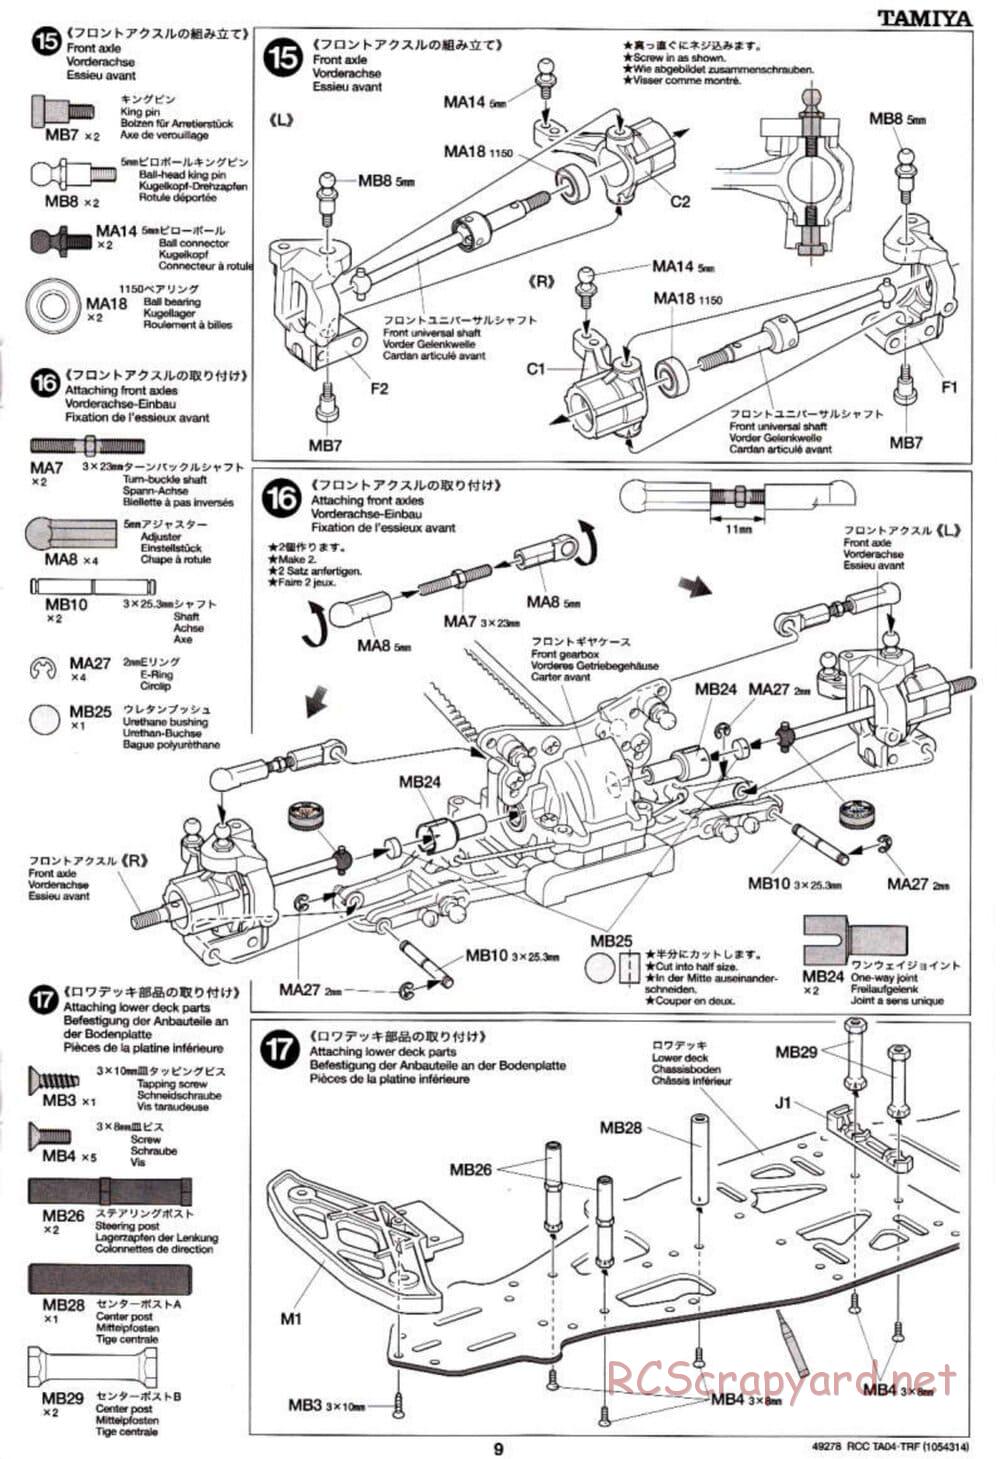 Tamiya - TA-04 TRF Special Chassis Chassis - Manual - Page 9